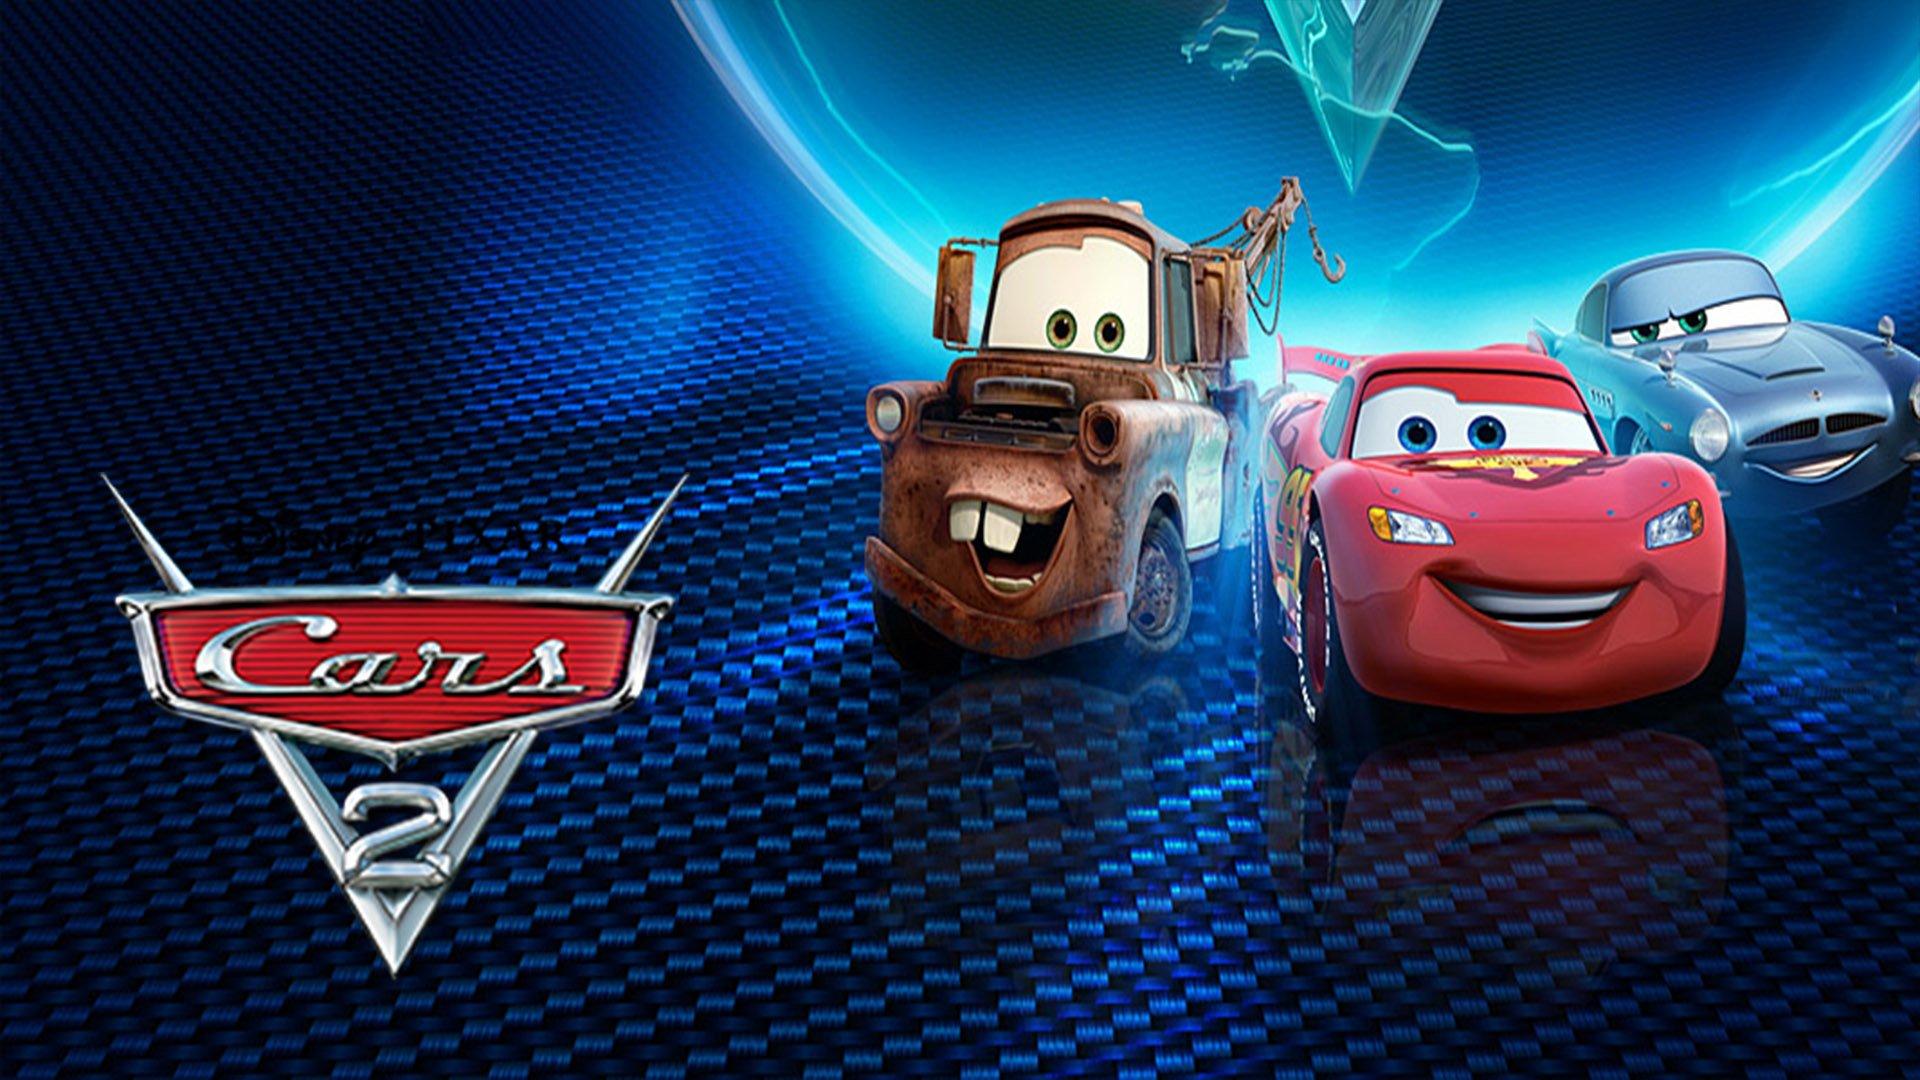 Wallpaper Blink of Cars 2 Wallpaper HD for Android, Windows